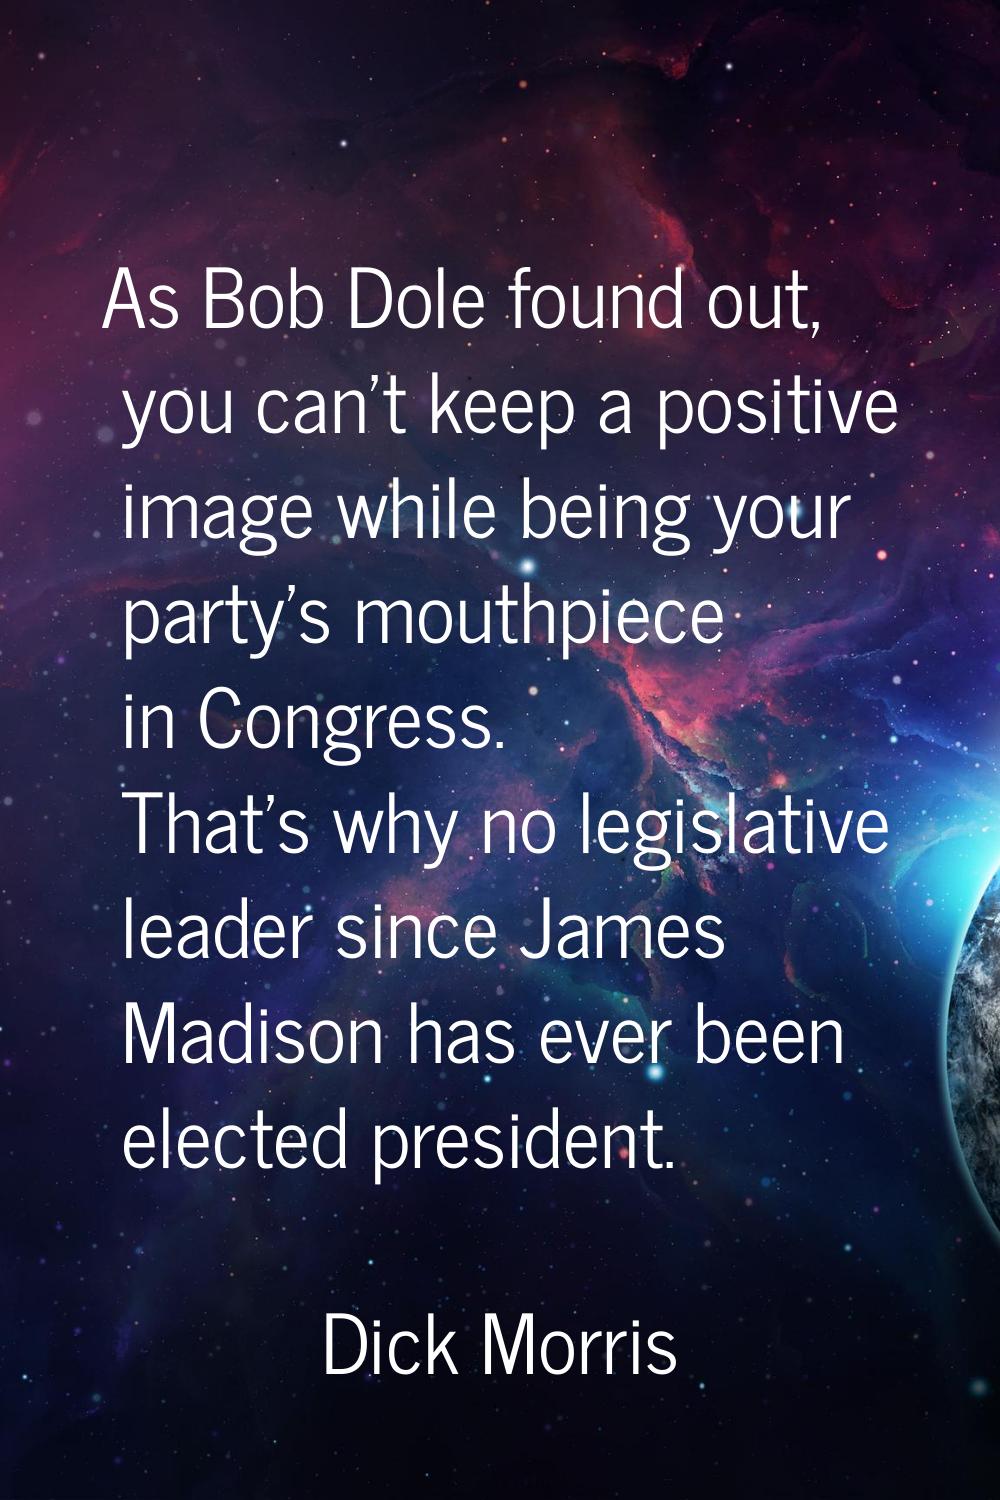 As Bob Dole found out, you can't keep a positive image while being your party's mouthpiece in Congr